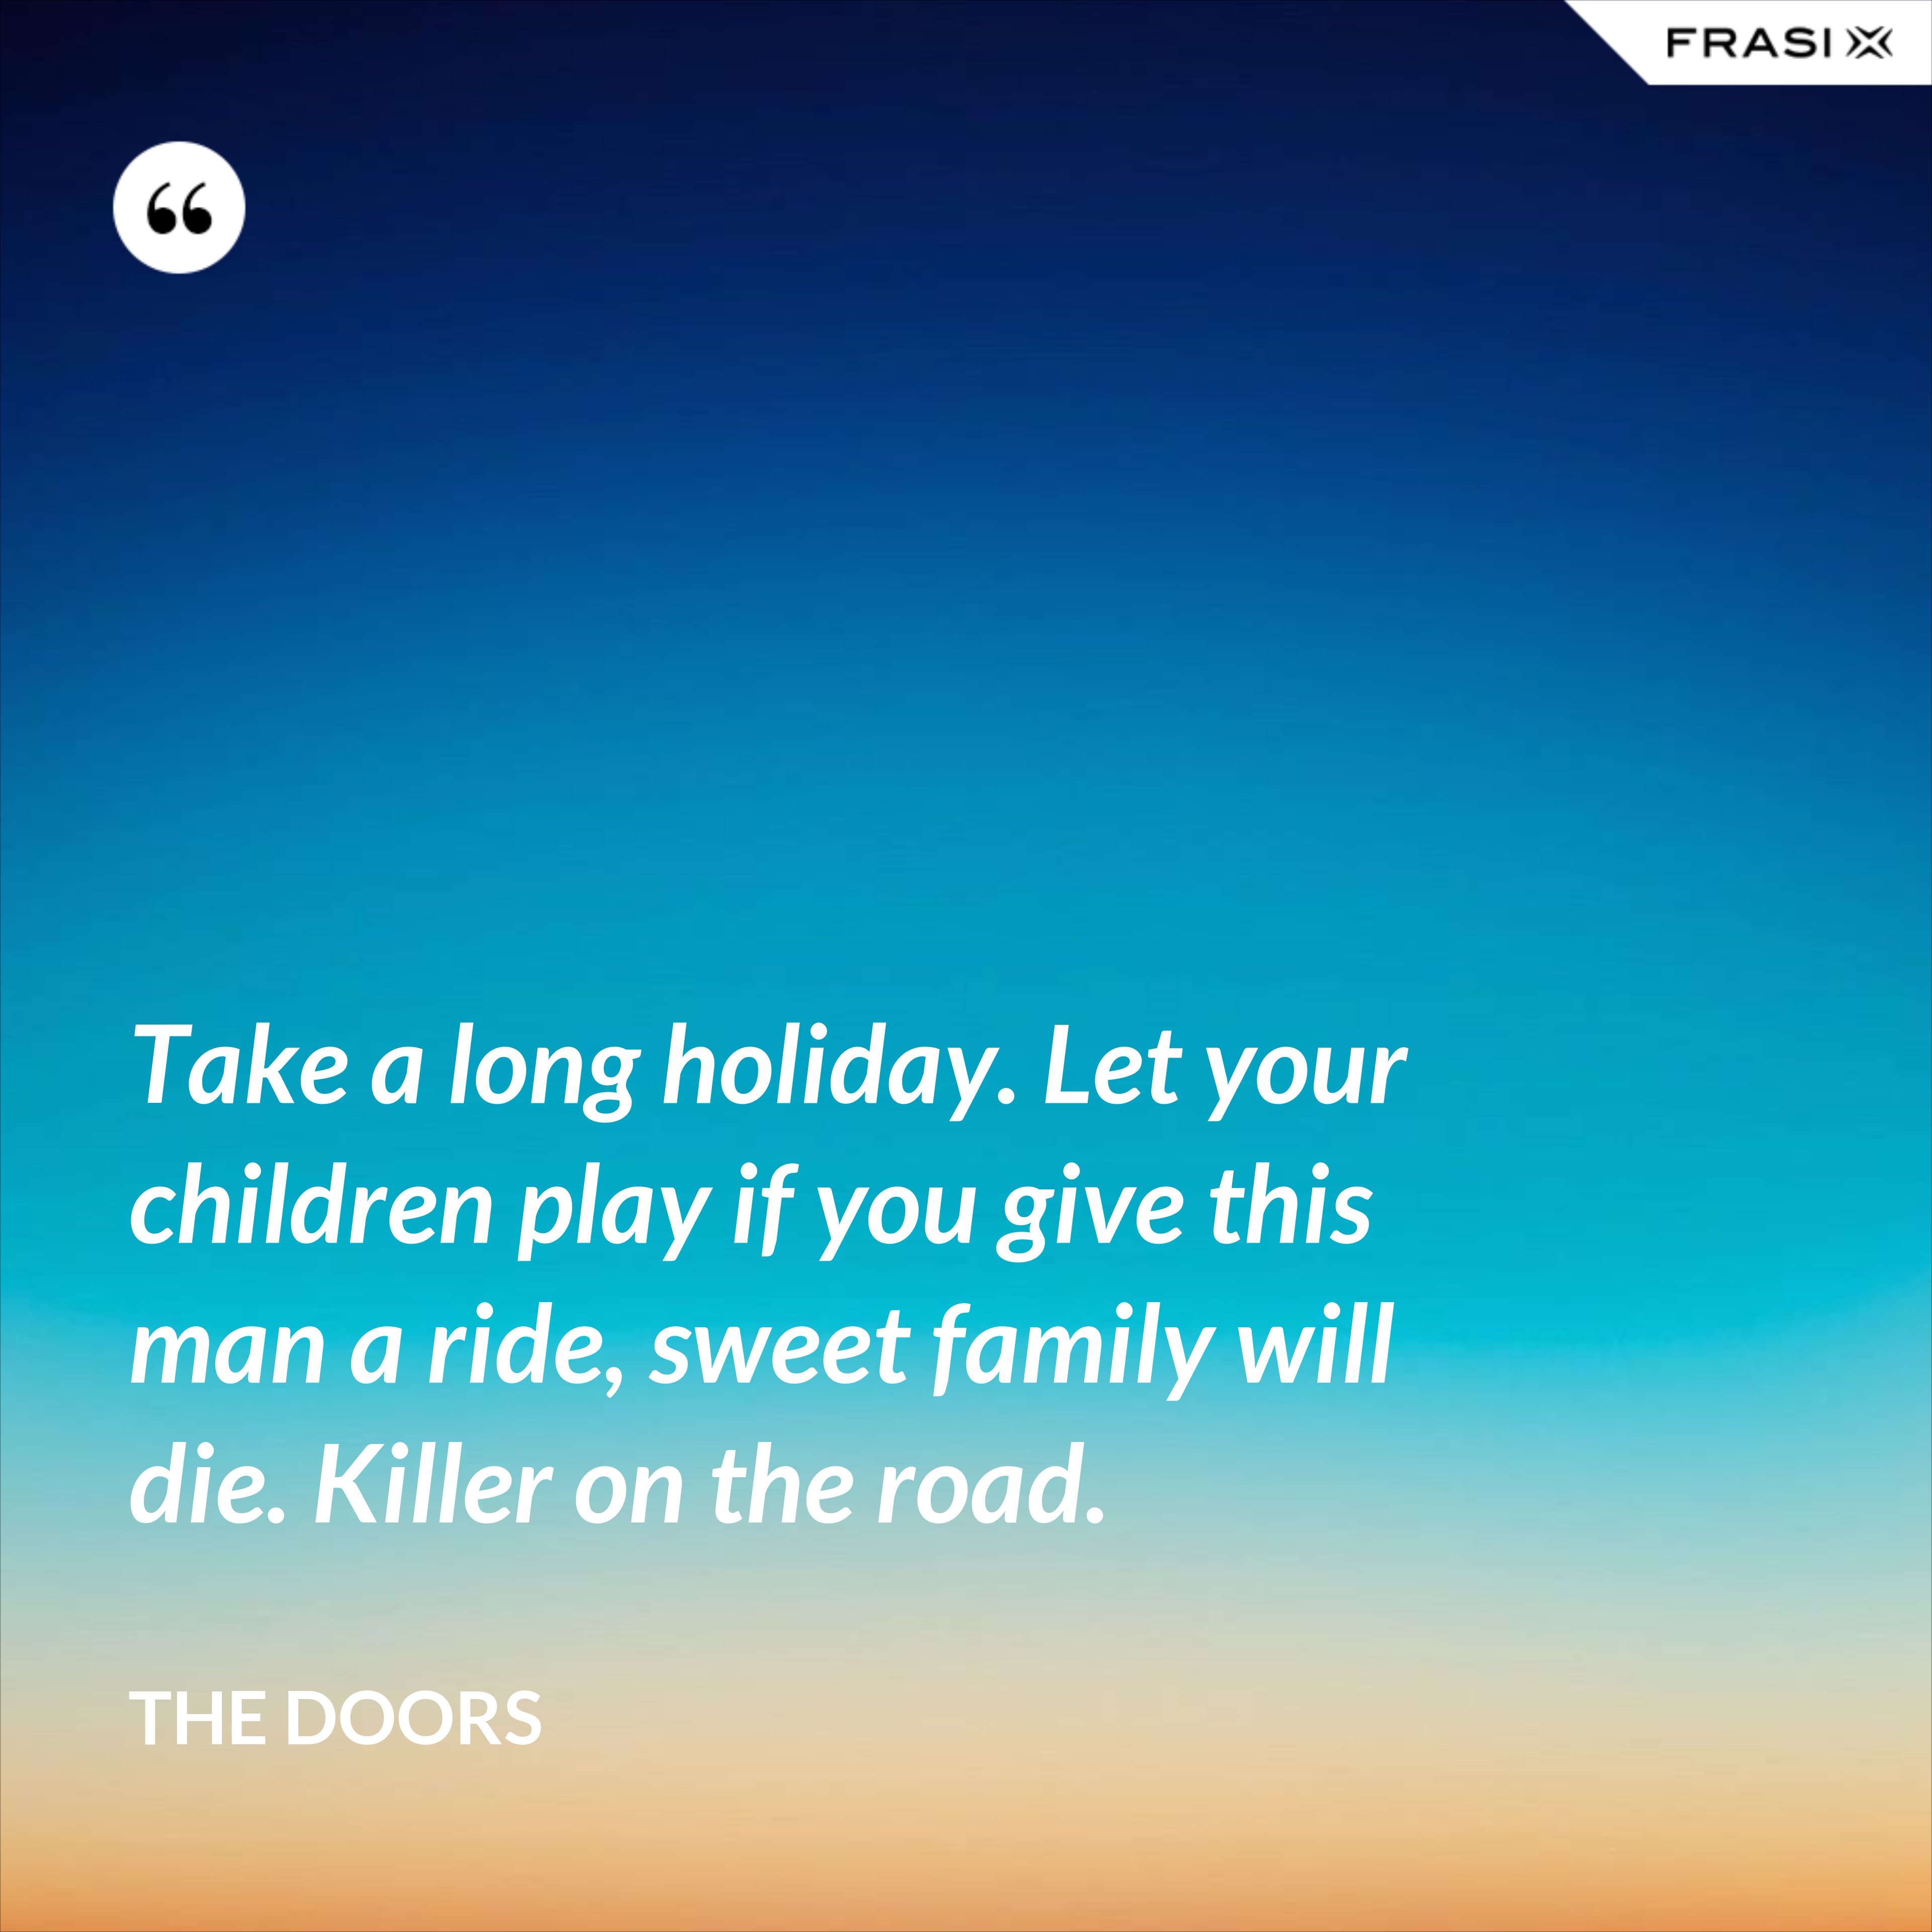 Take a long holiday. Let your children play if you give this man a ride, sweet family will die. Killer on the road. - The Doors